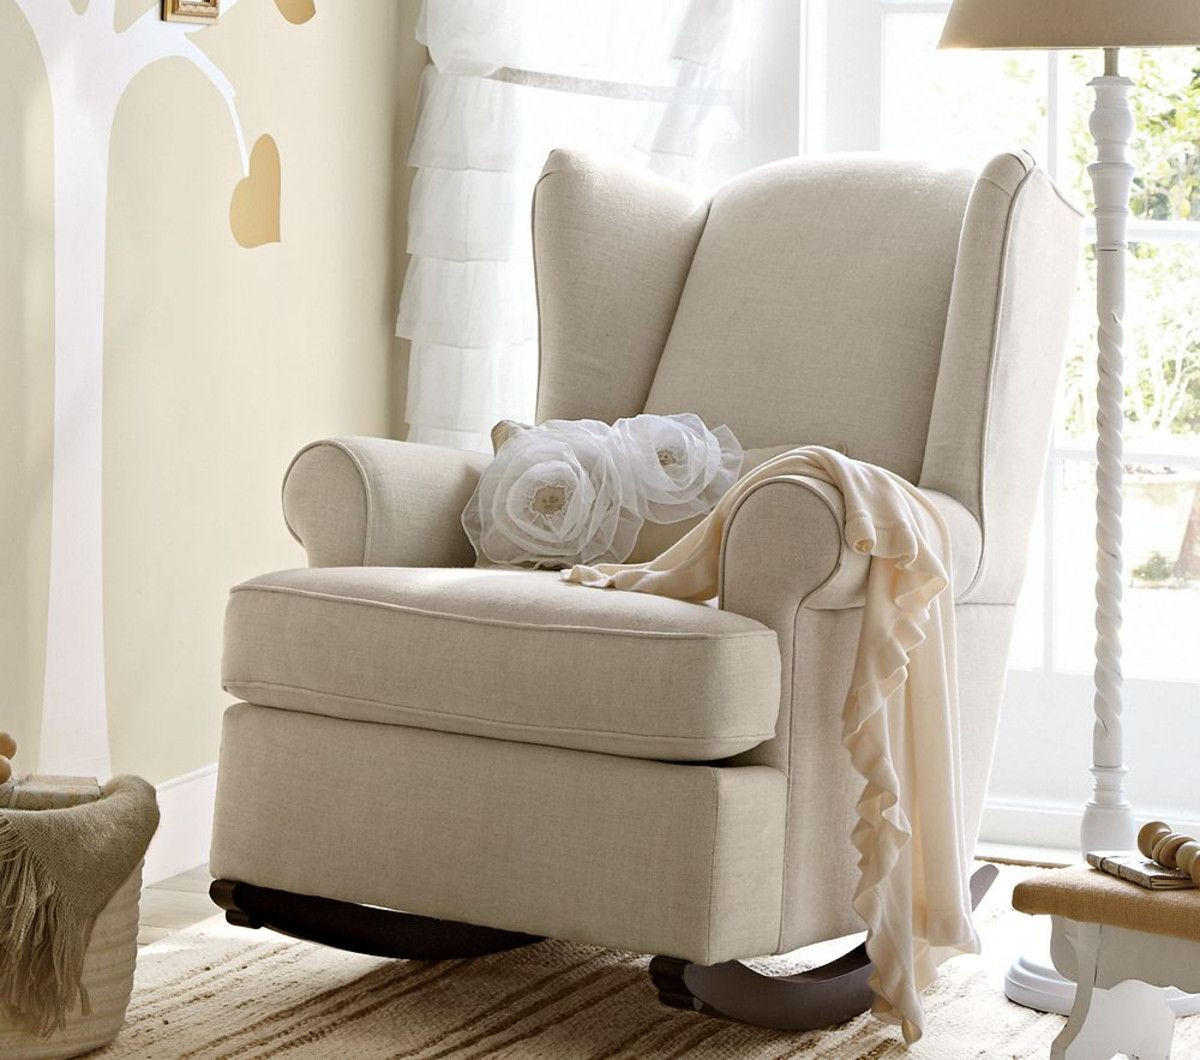 Pottery Barn Kids Rocking Chair
 Ensure feeding time is fortable Wingback Convertible